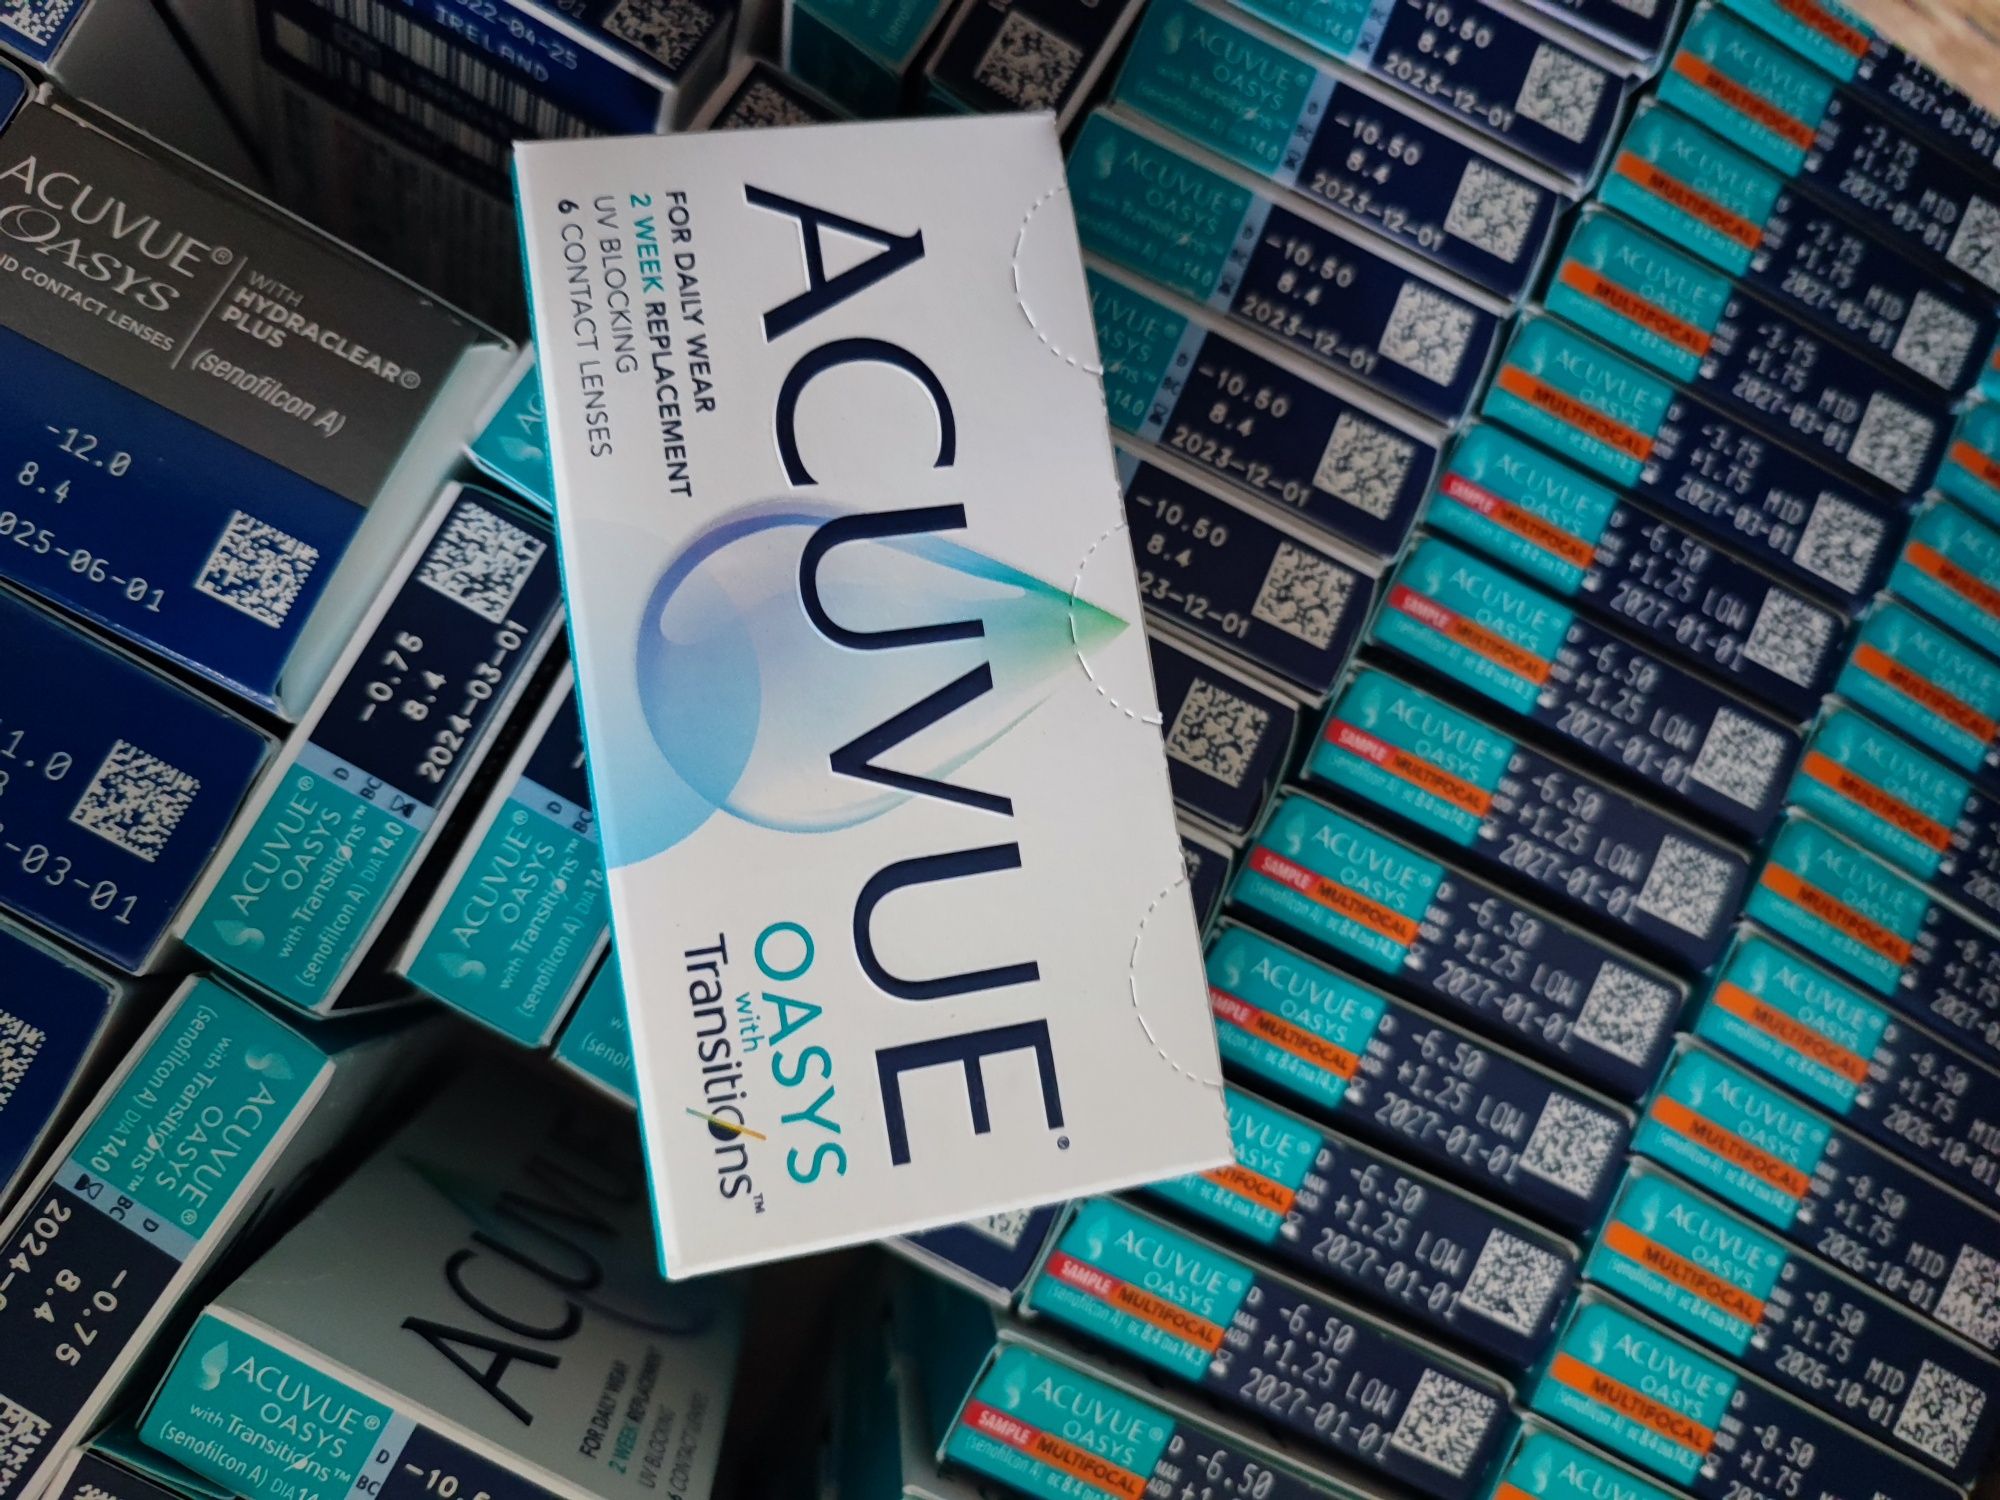 Acuvue Oasys Multifocal UV Blocking When Used for Daily Wear